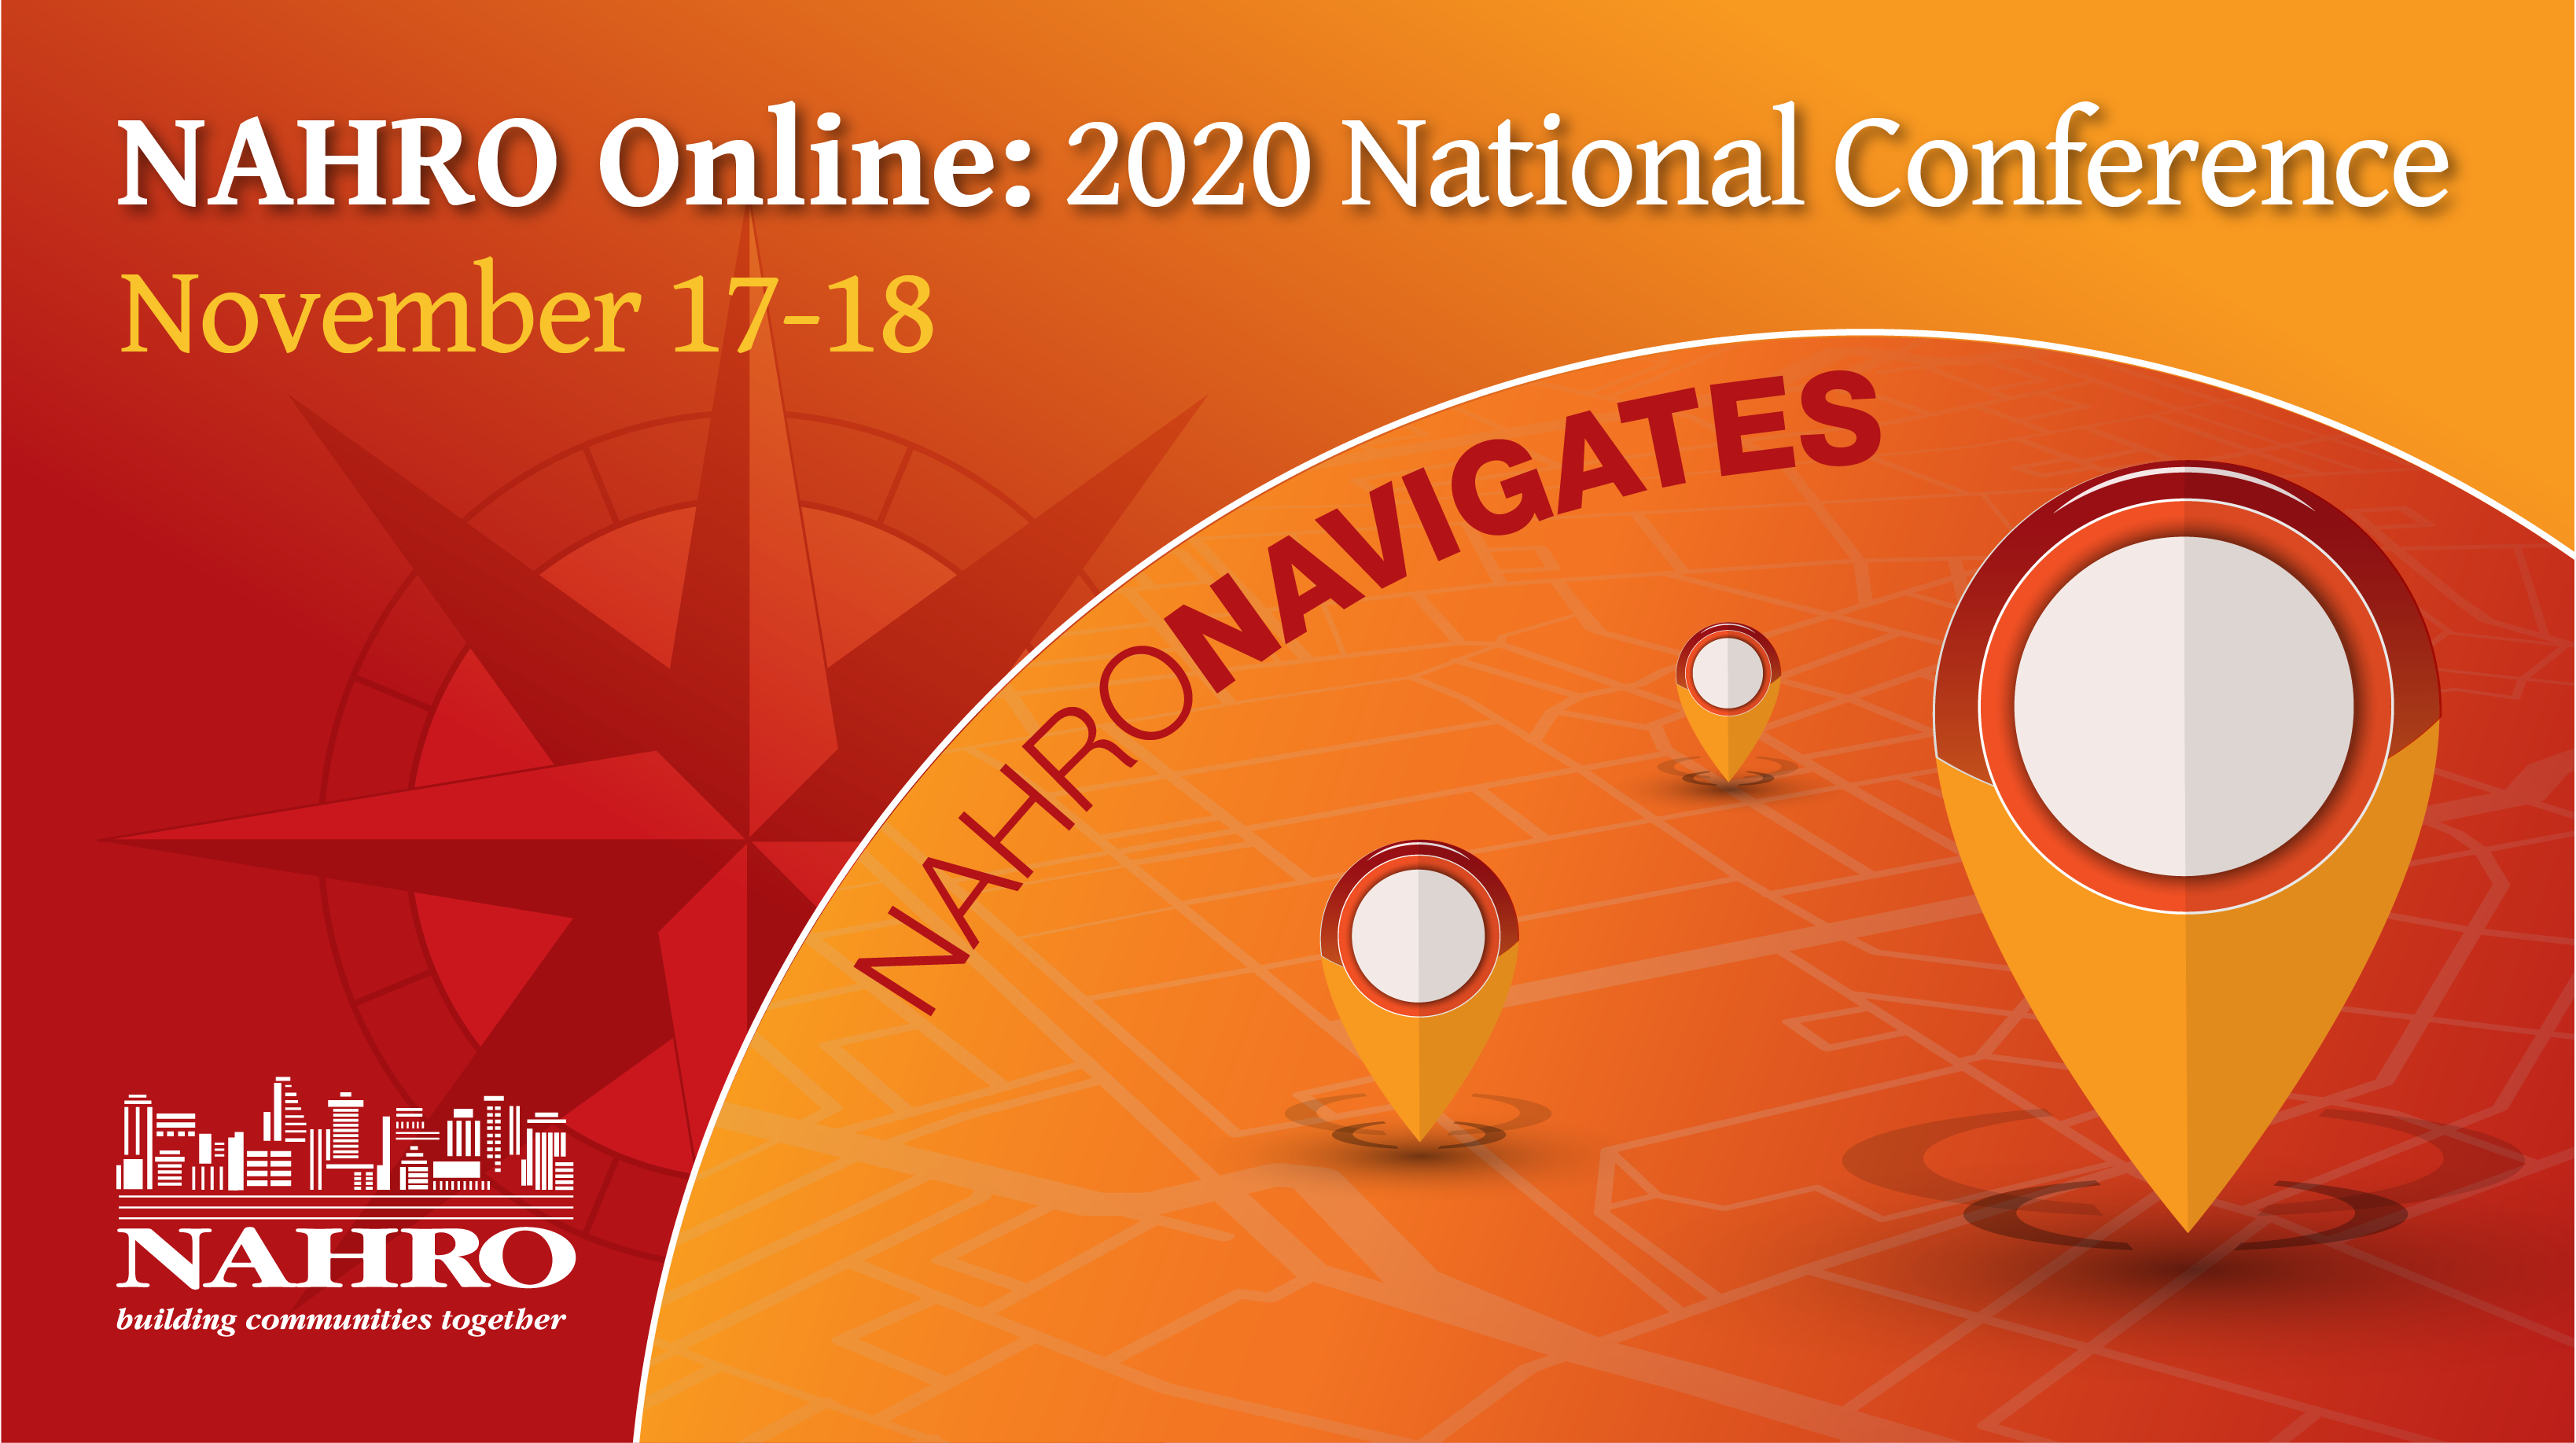 NAHRO Online 2020 National Conference The National Association of